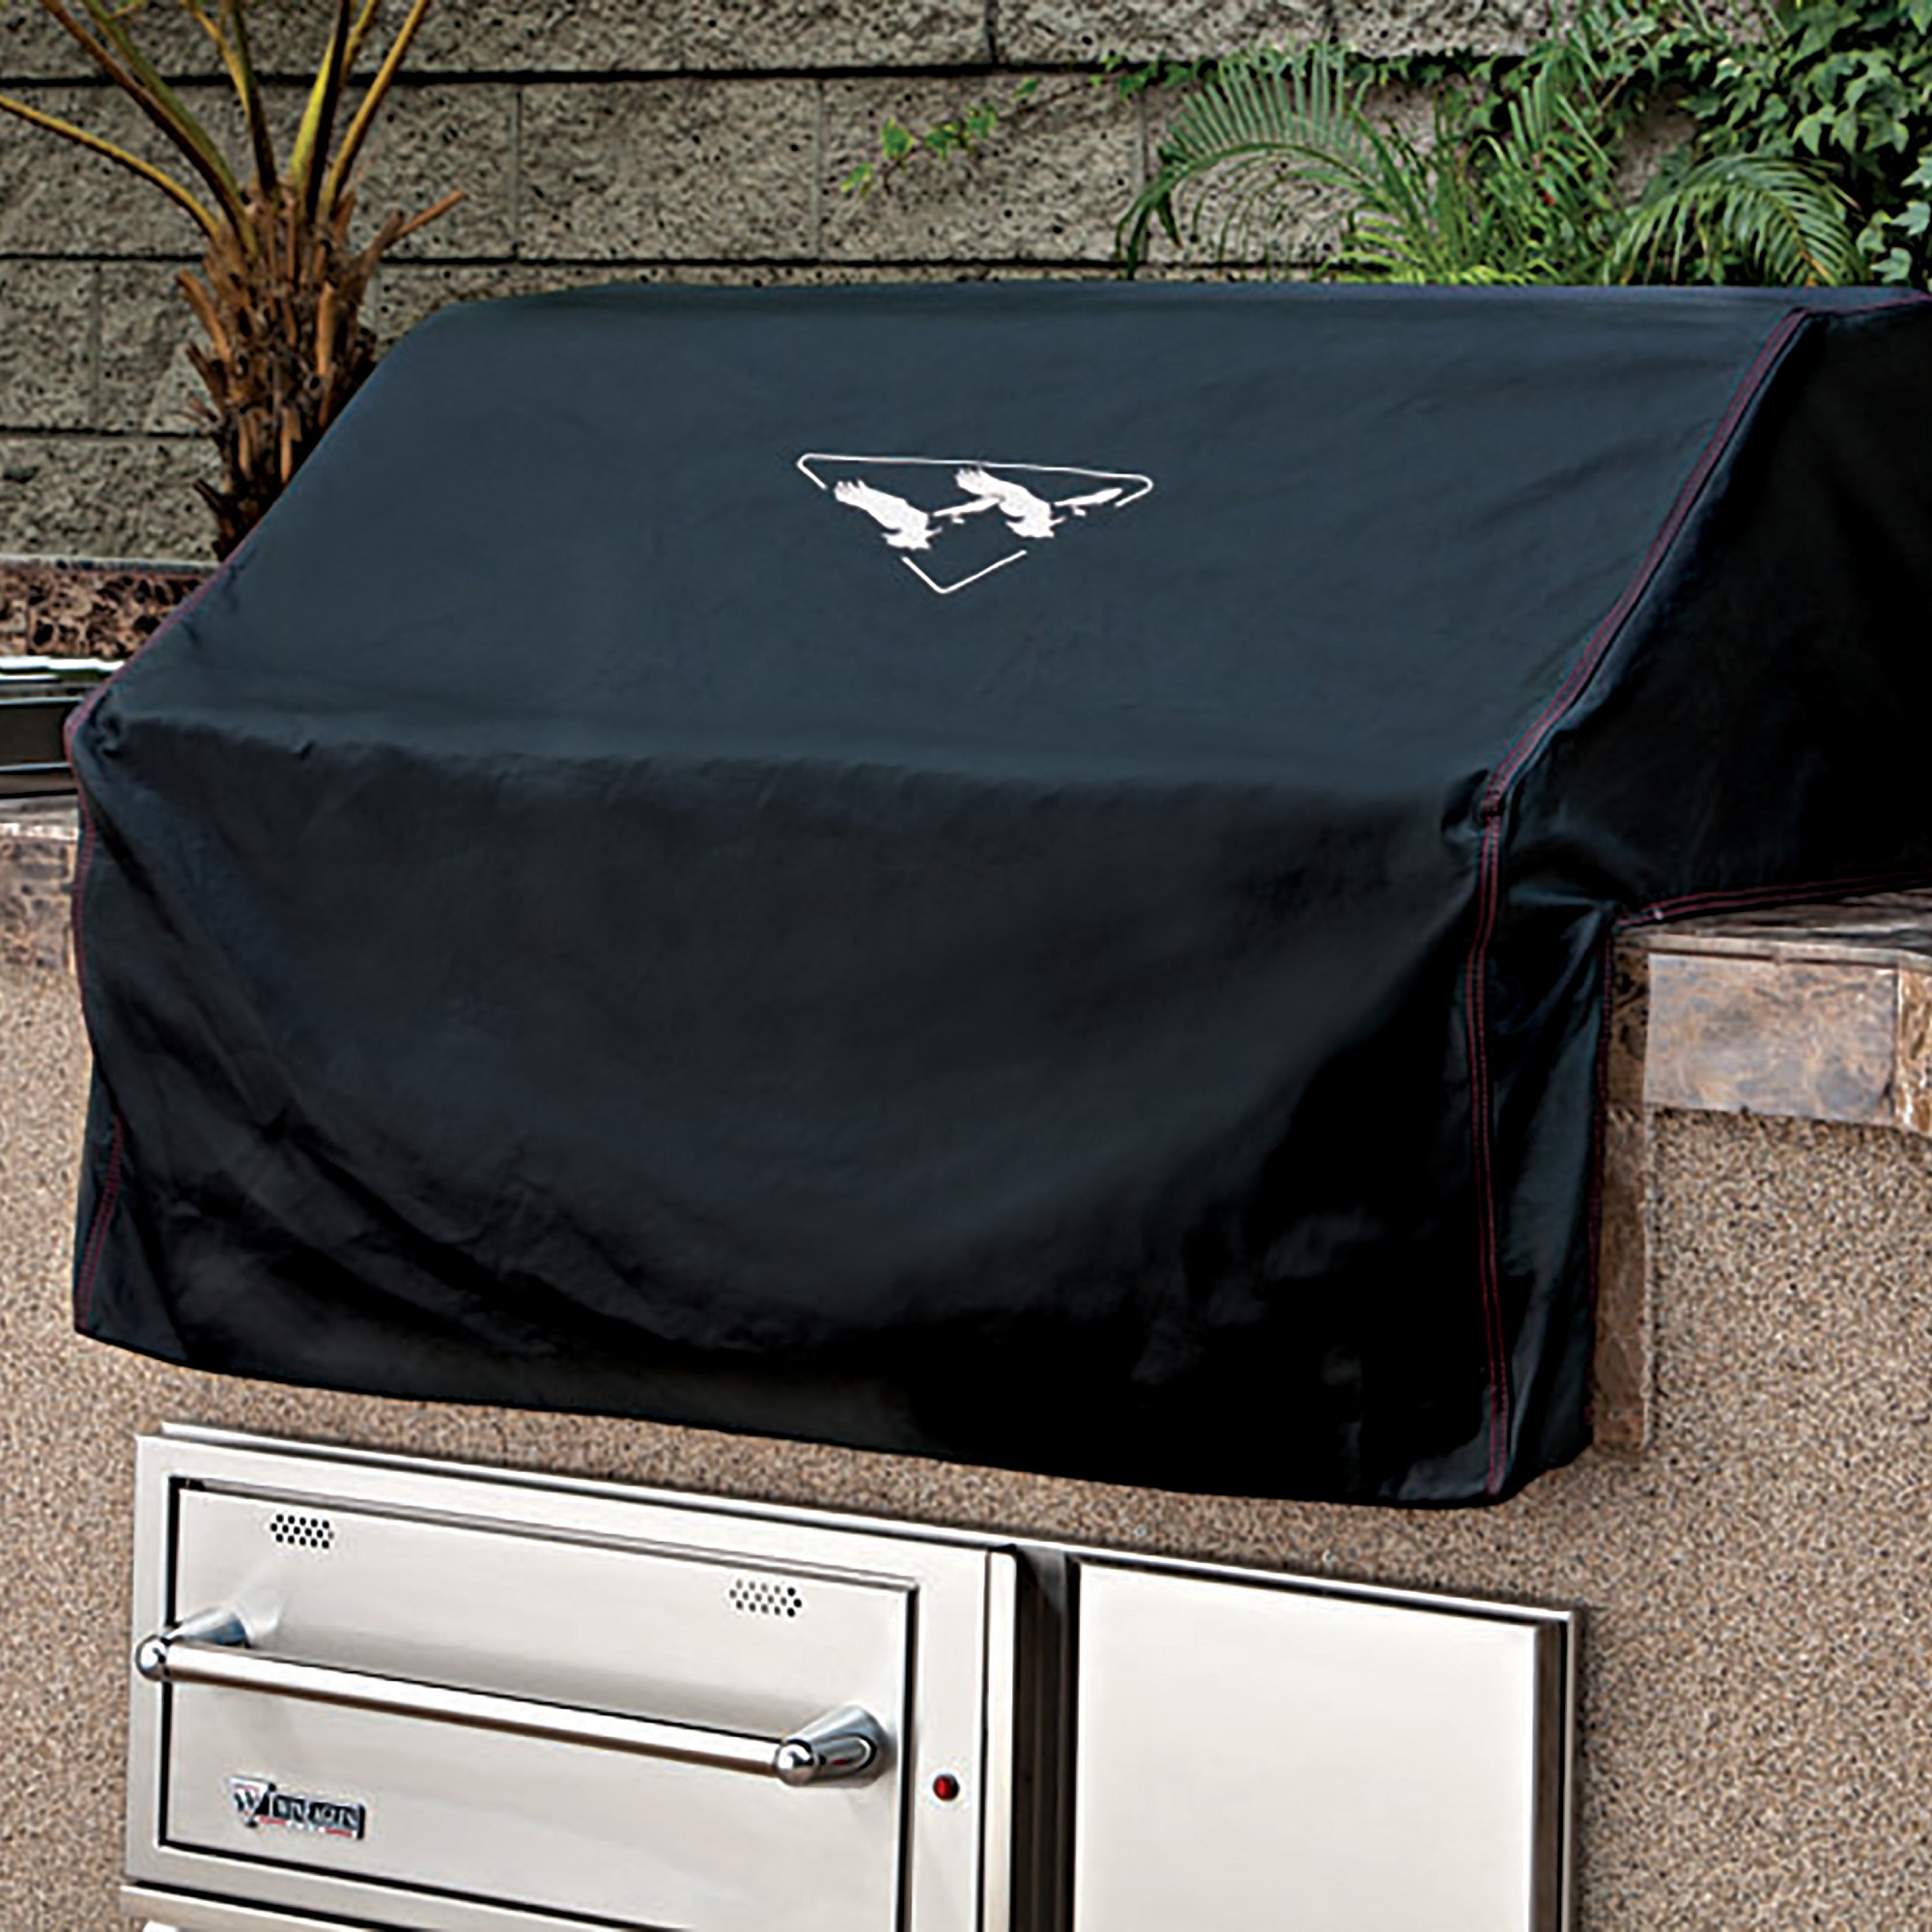 Dometic Twin Eagles Built-In Grill Vinyl Cover